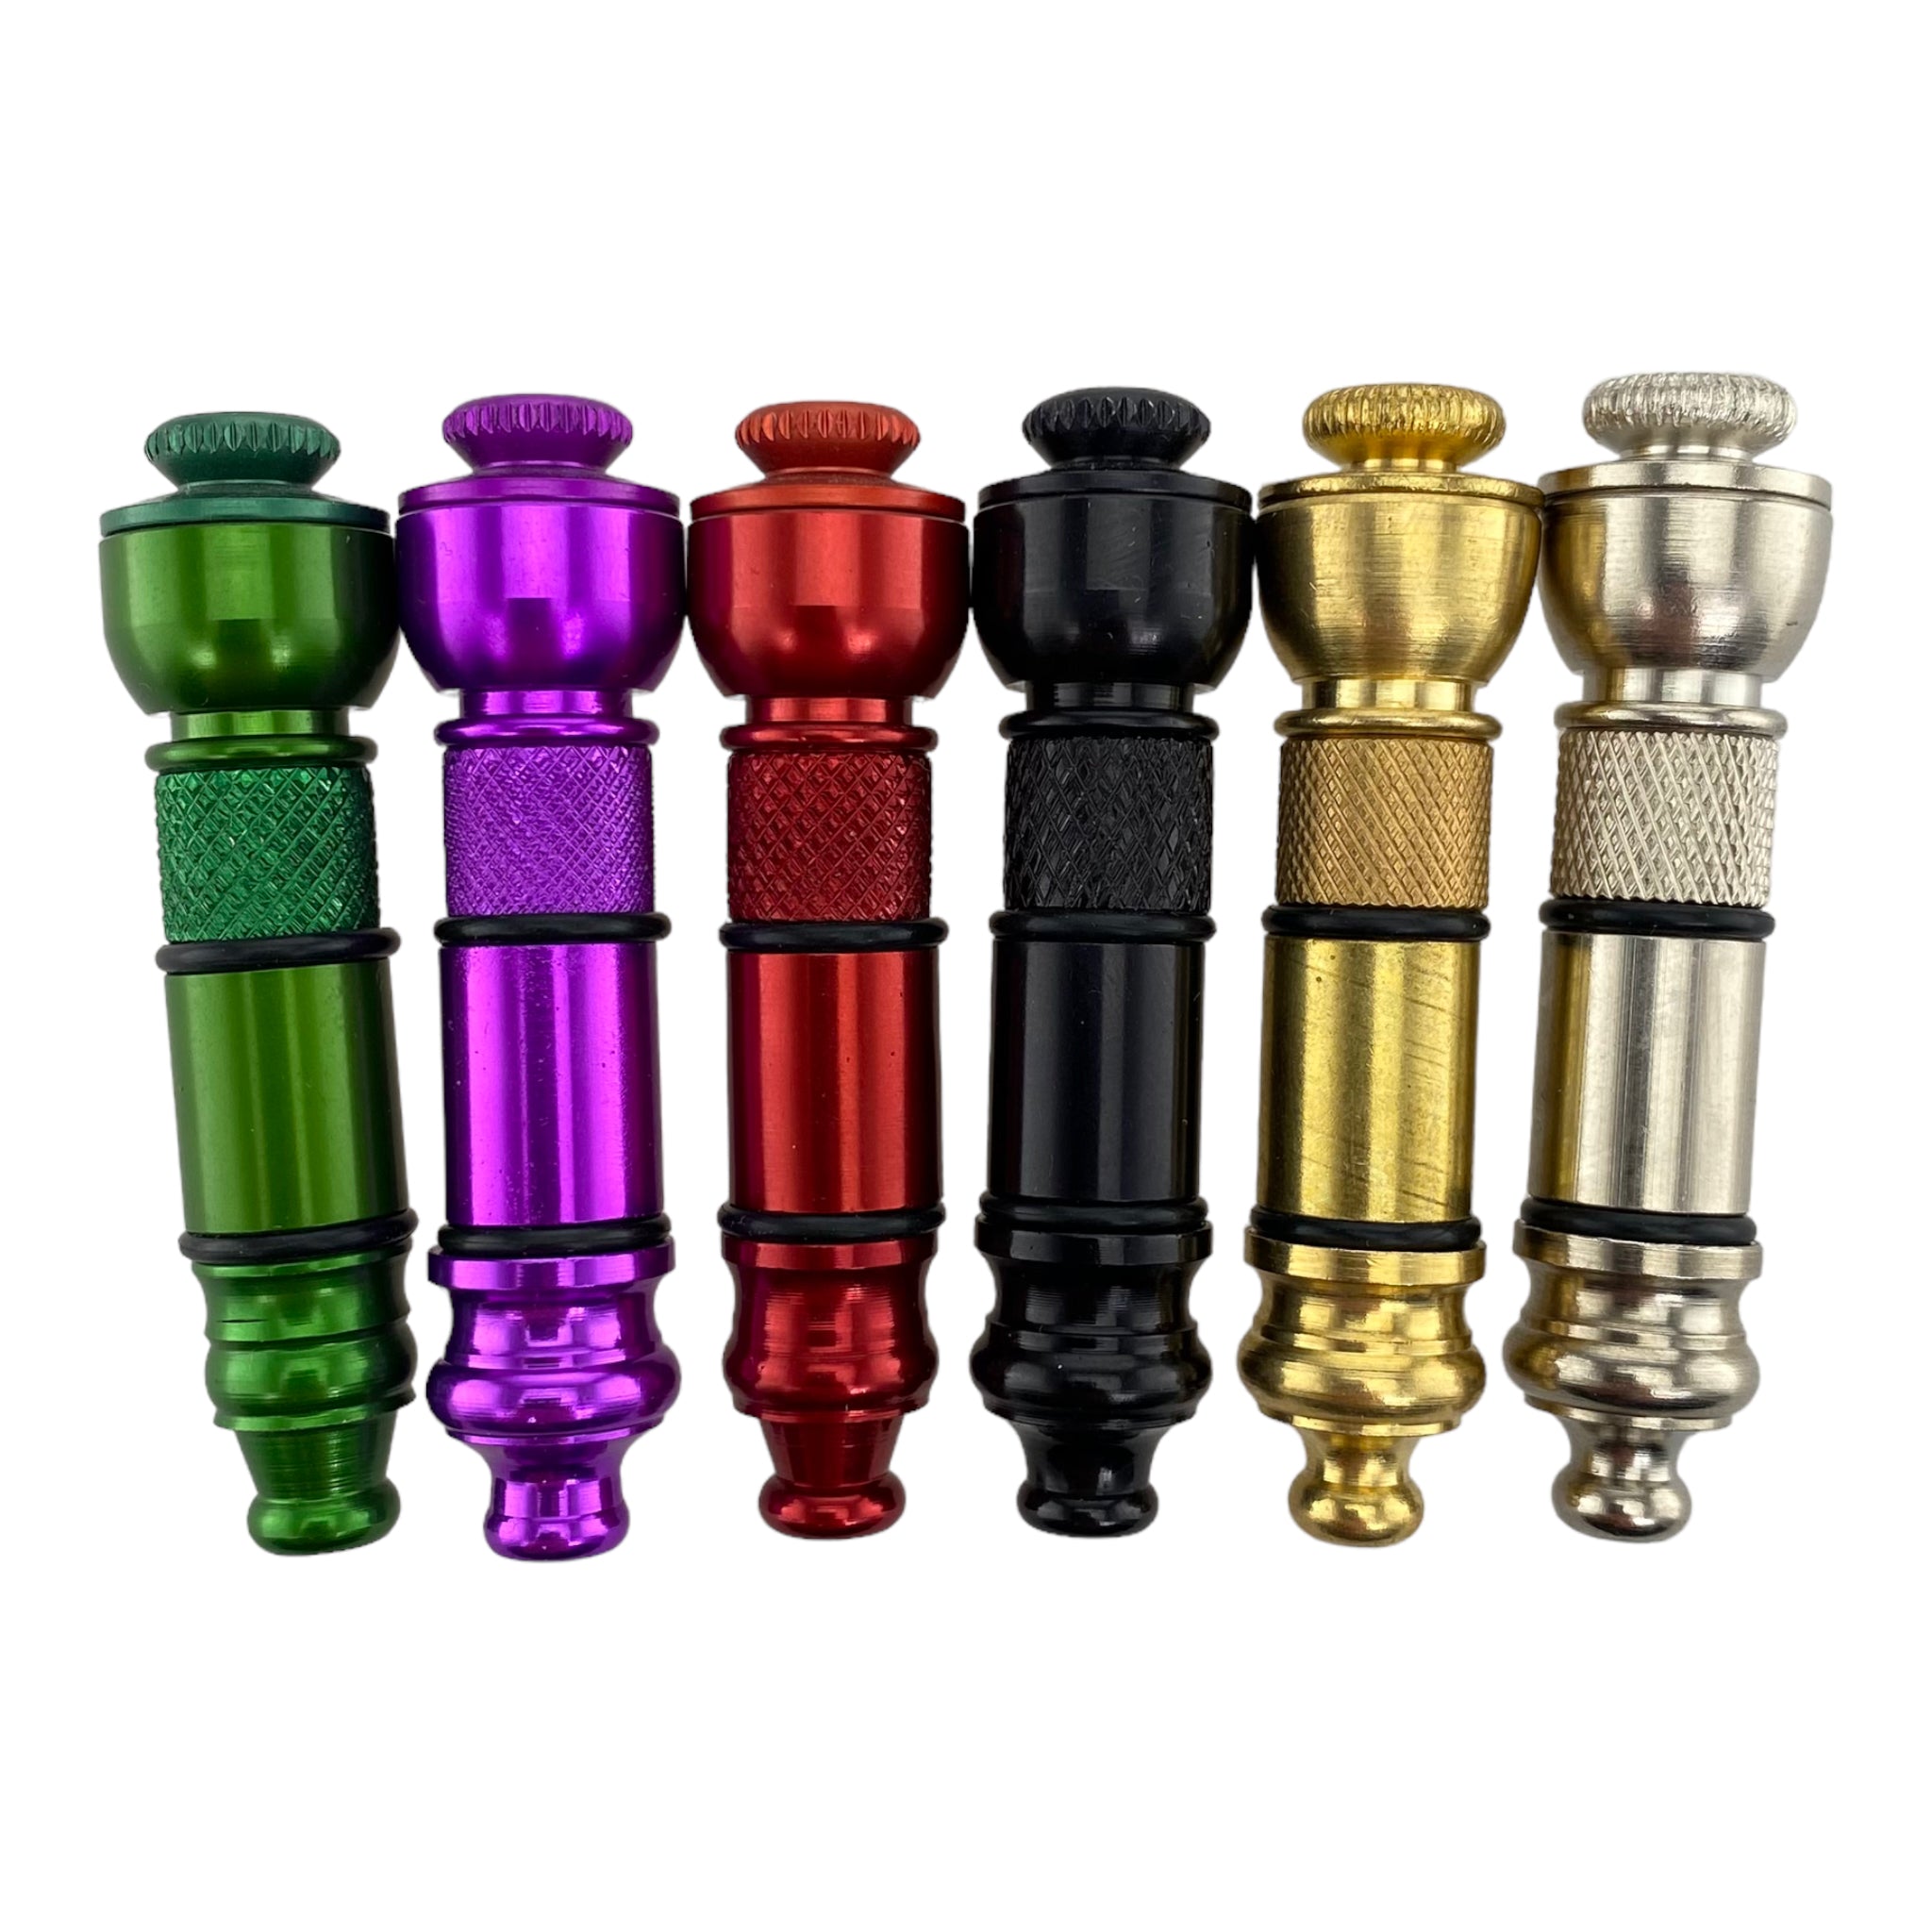 Metal smoking Hand Pipes Anodized Aluminum Mini Chillum One Hitter Hand Pipe With Cap 2 Pack Assorted Colors